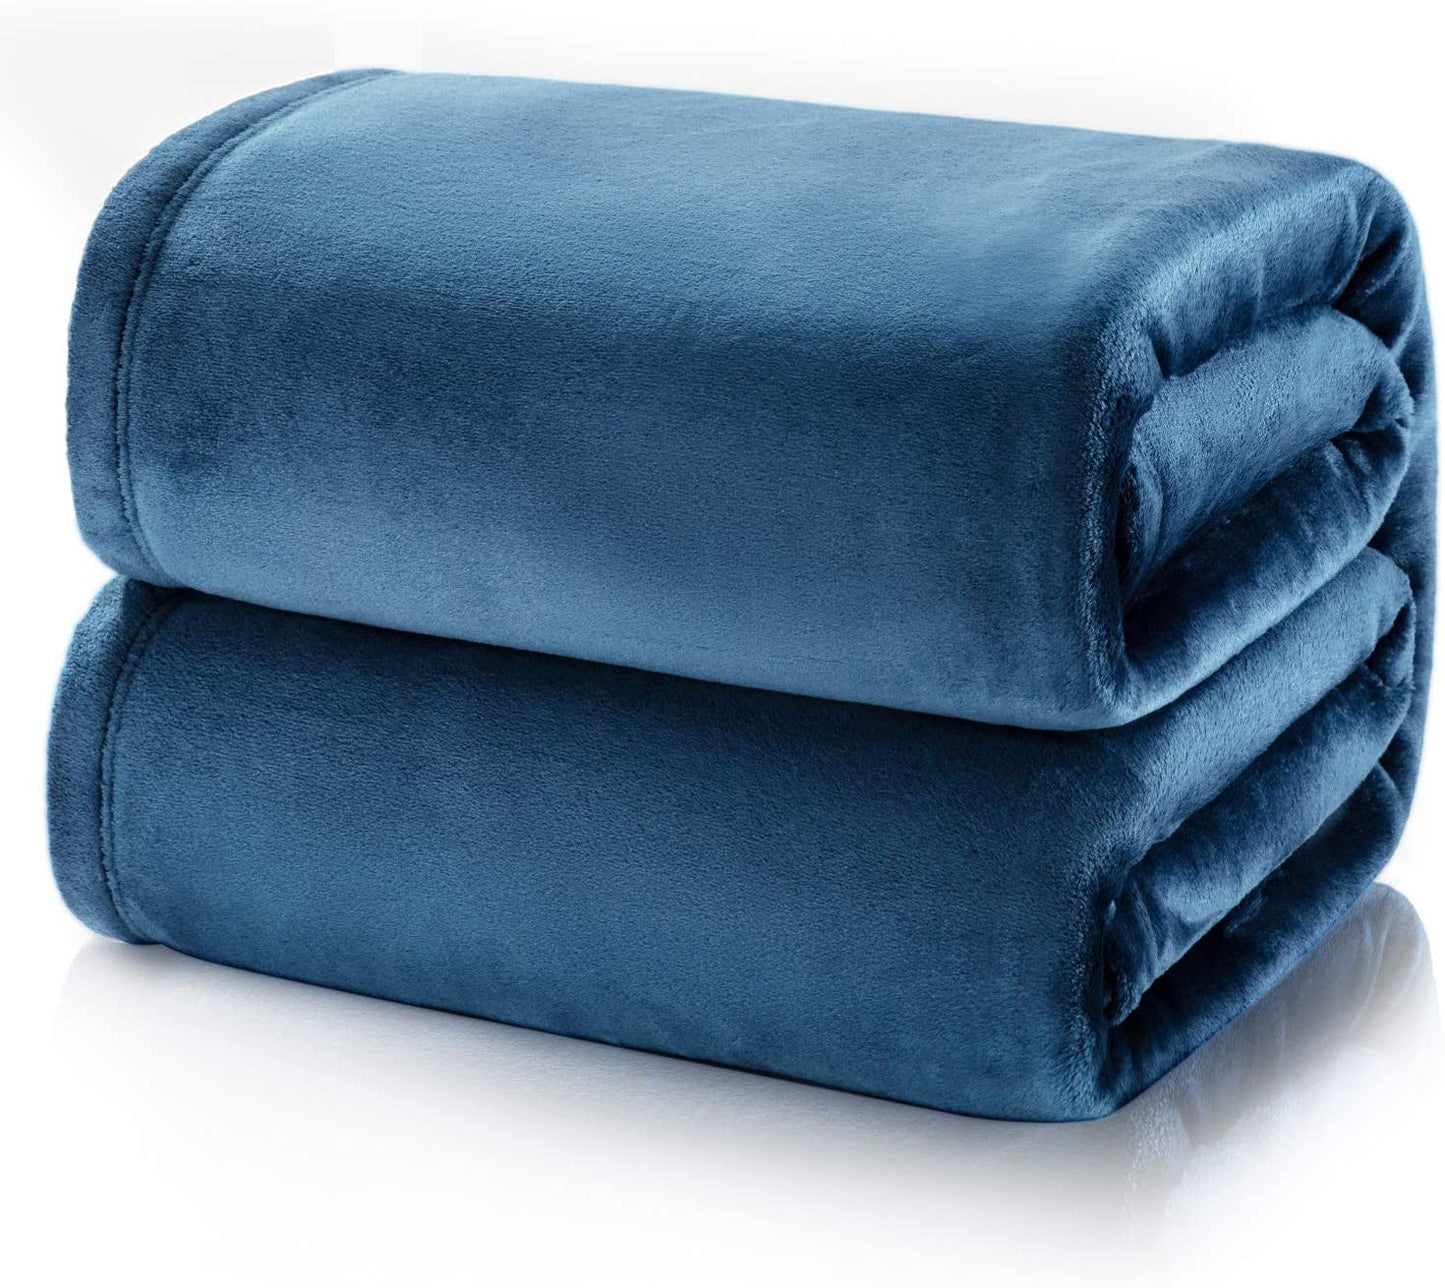 loomsmith-solid-double-AC-blanket-in-dark-blue-flannel-fabric-soft-in-touch-gift-item-as-token-of-love-comfy